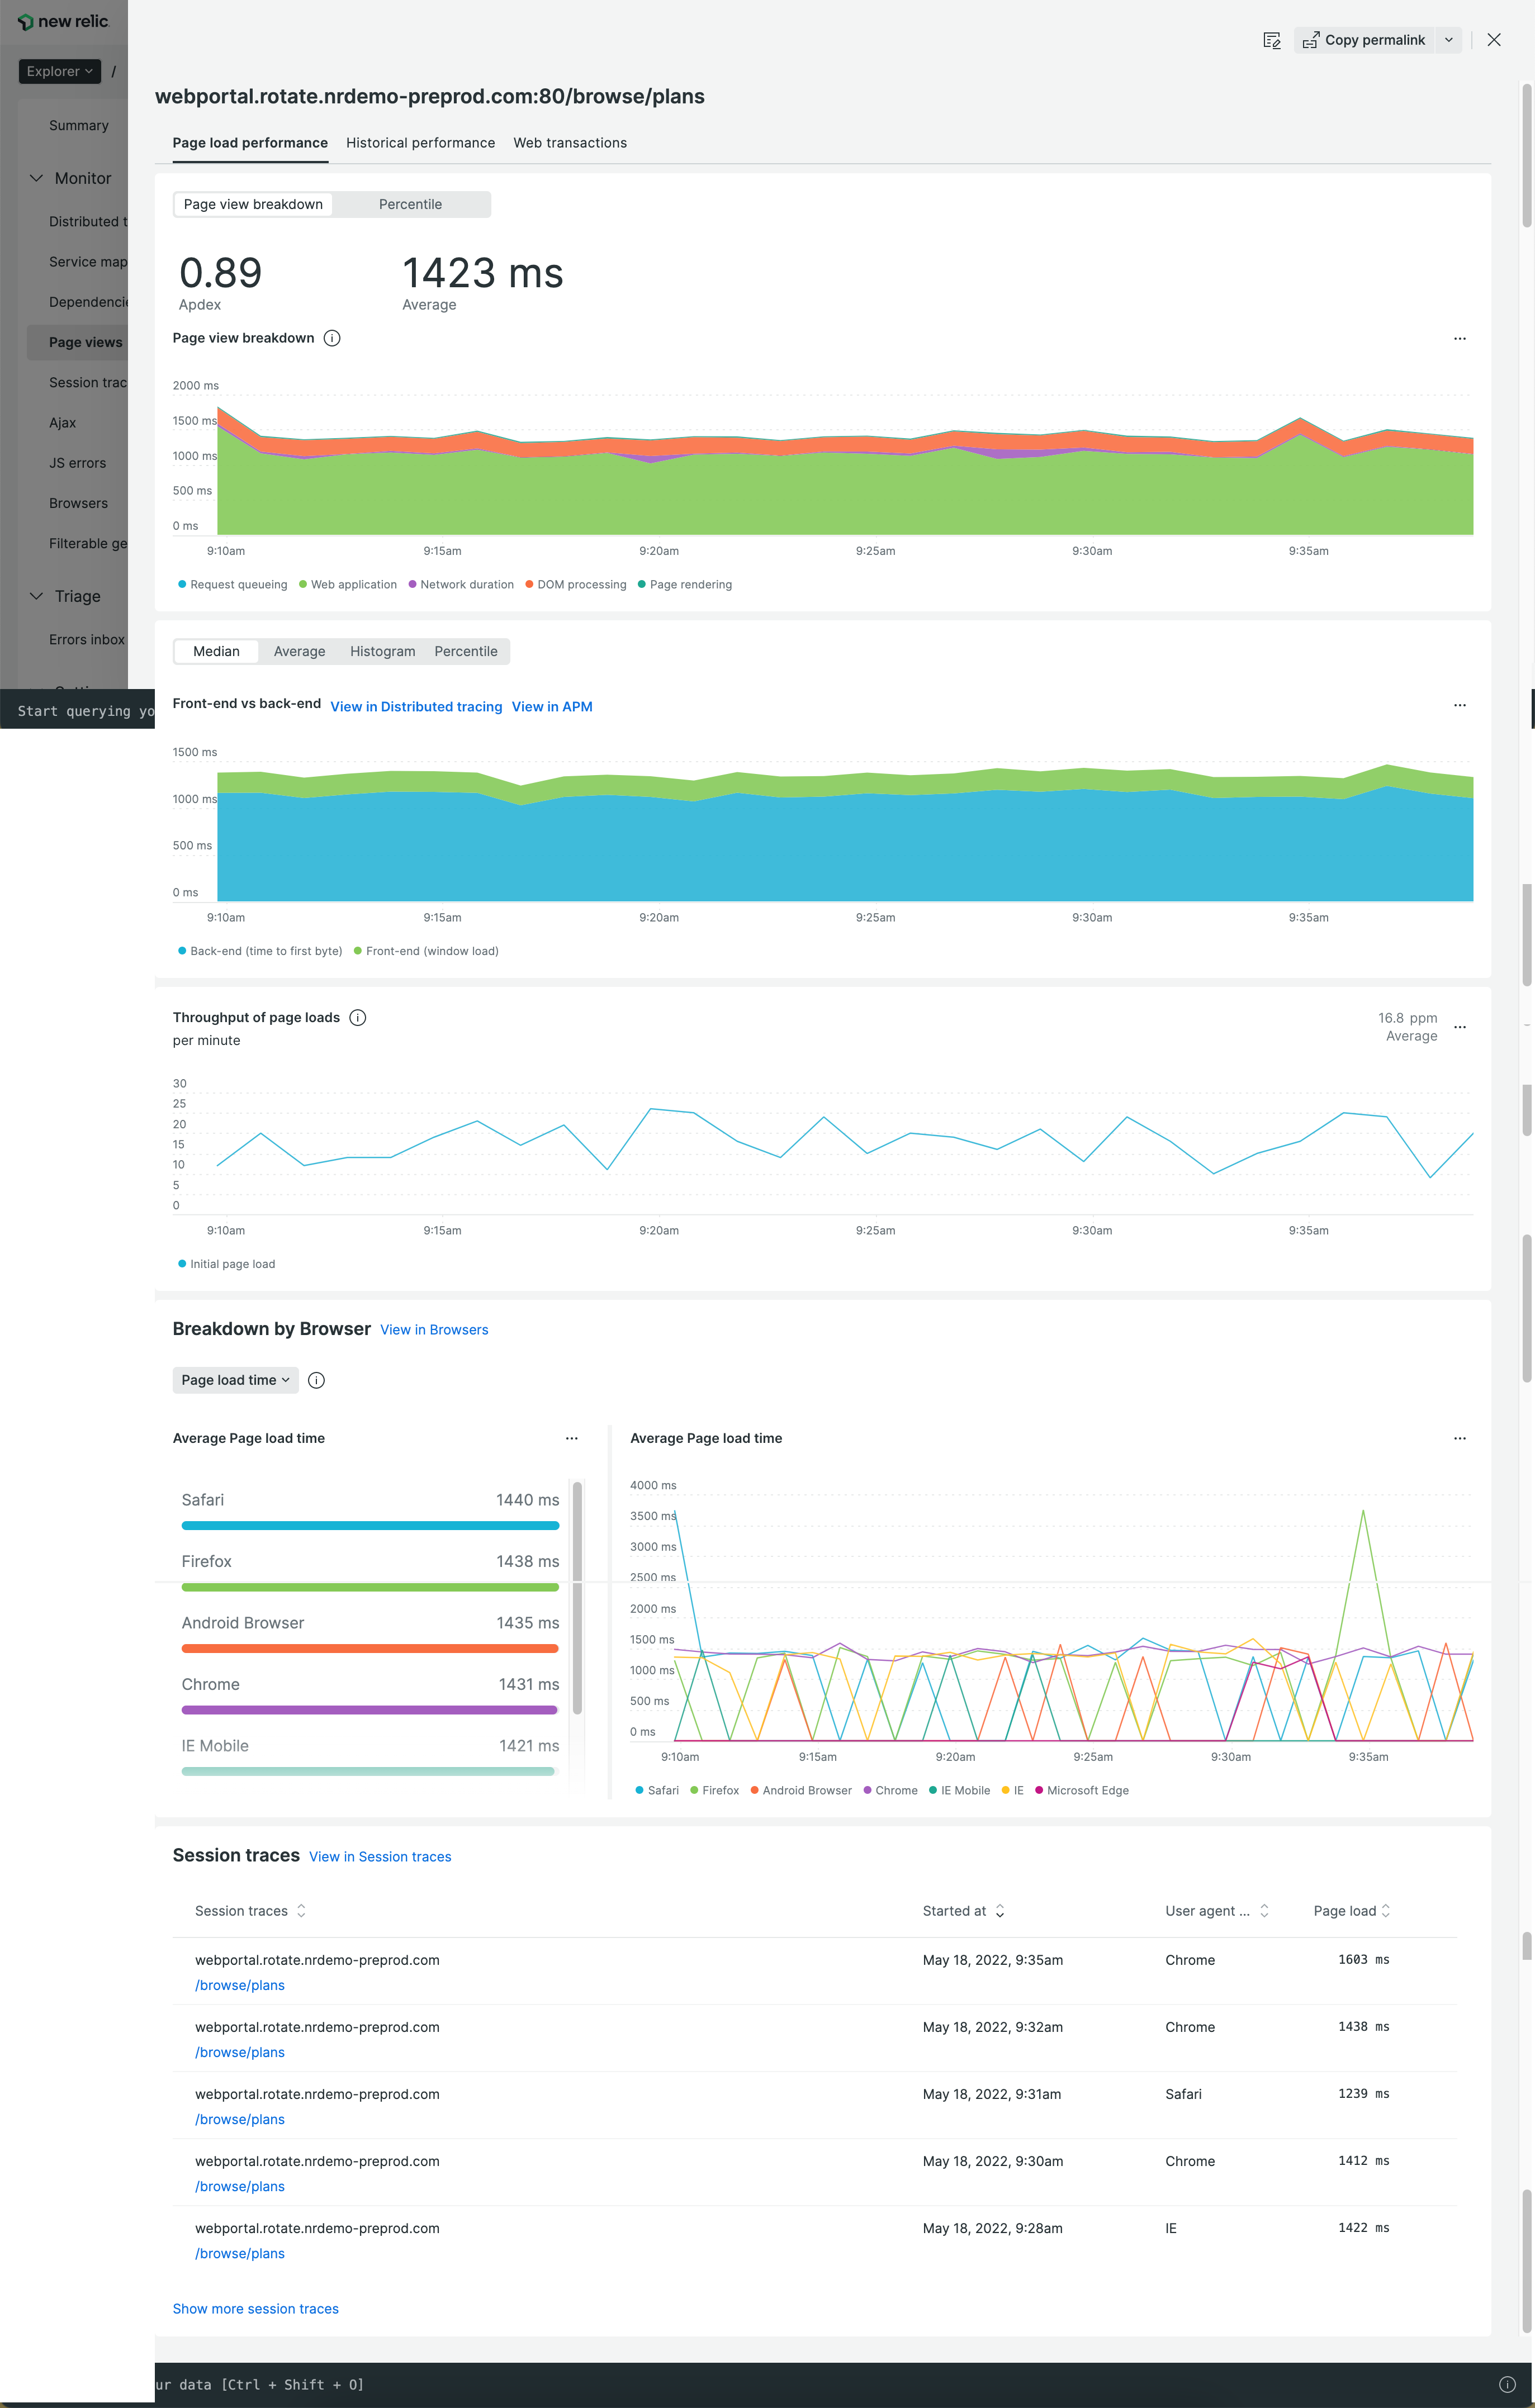 A screenshot of the page view details UI in New Relic